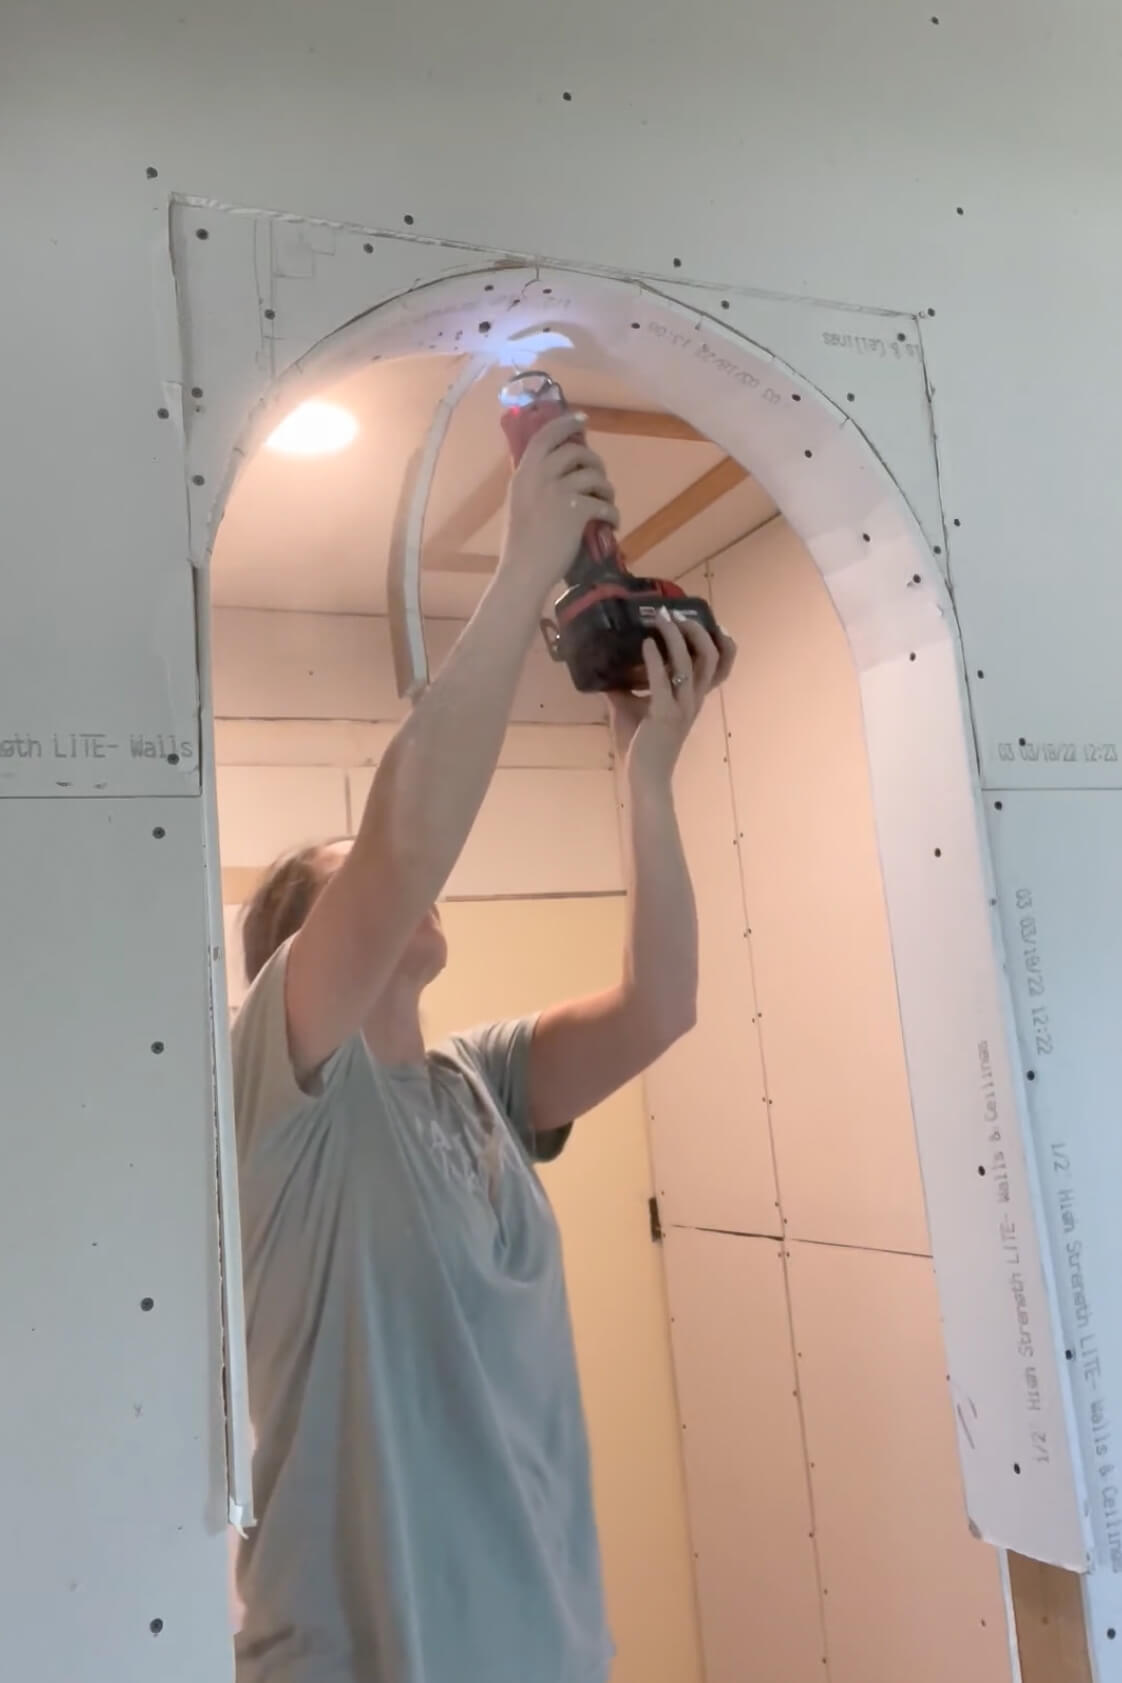 Adding drywall to an arched doorway. 